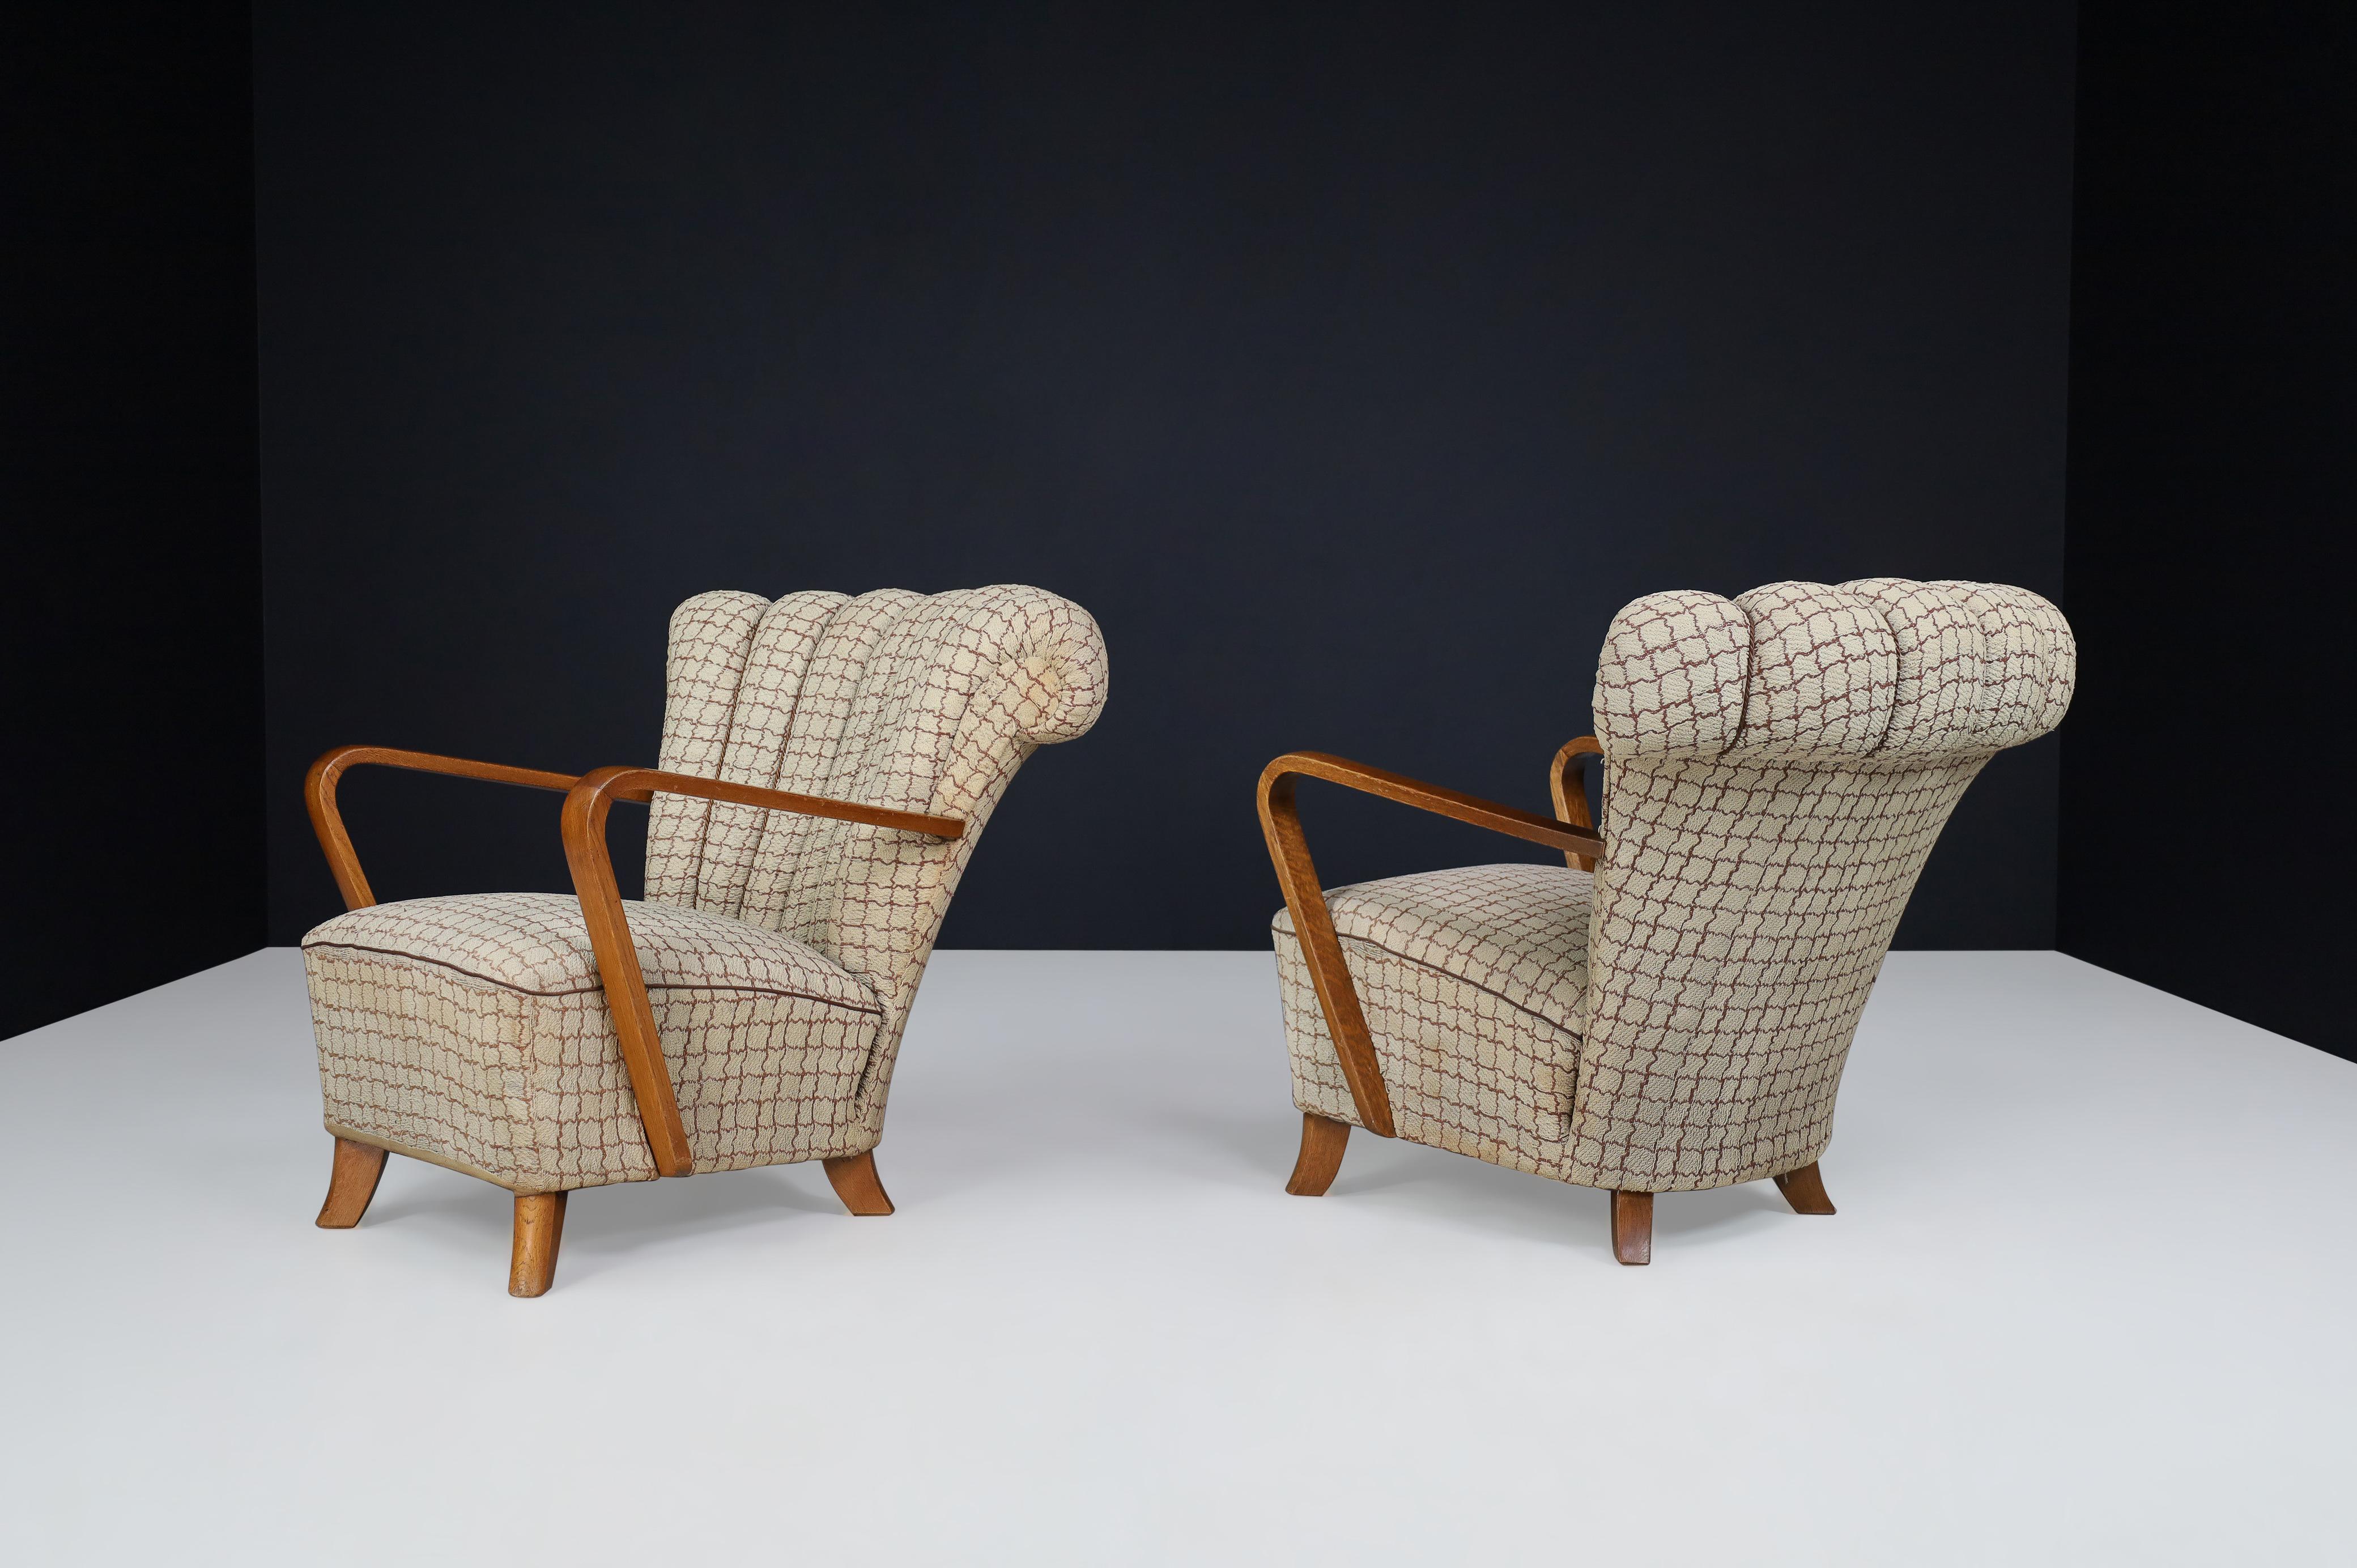 Fabric Art Deco Fan-Shaped Armchairs in Bentwood and Original Upholstery, Praque, 1930s For Sale